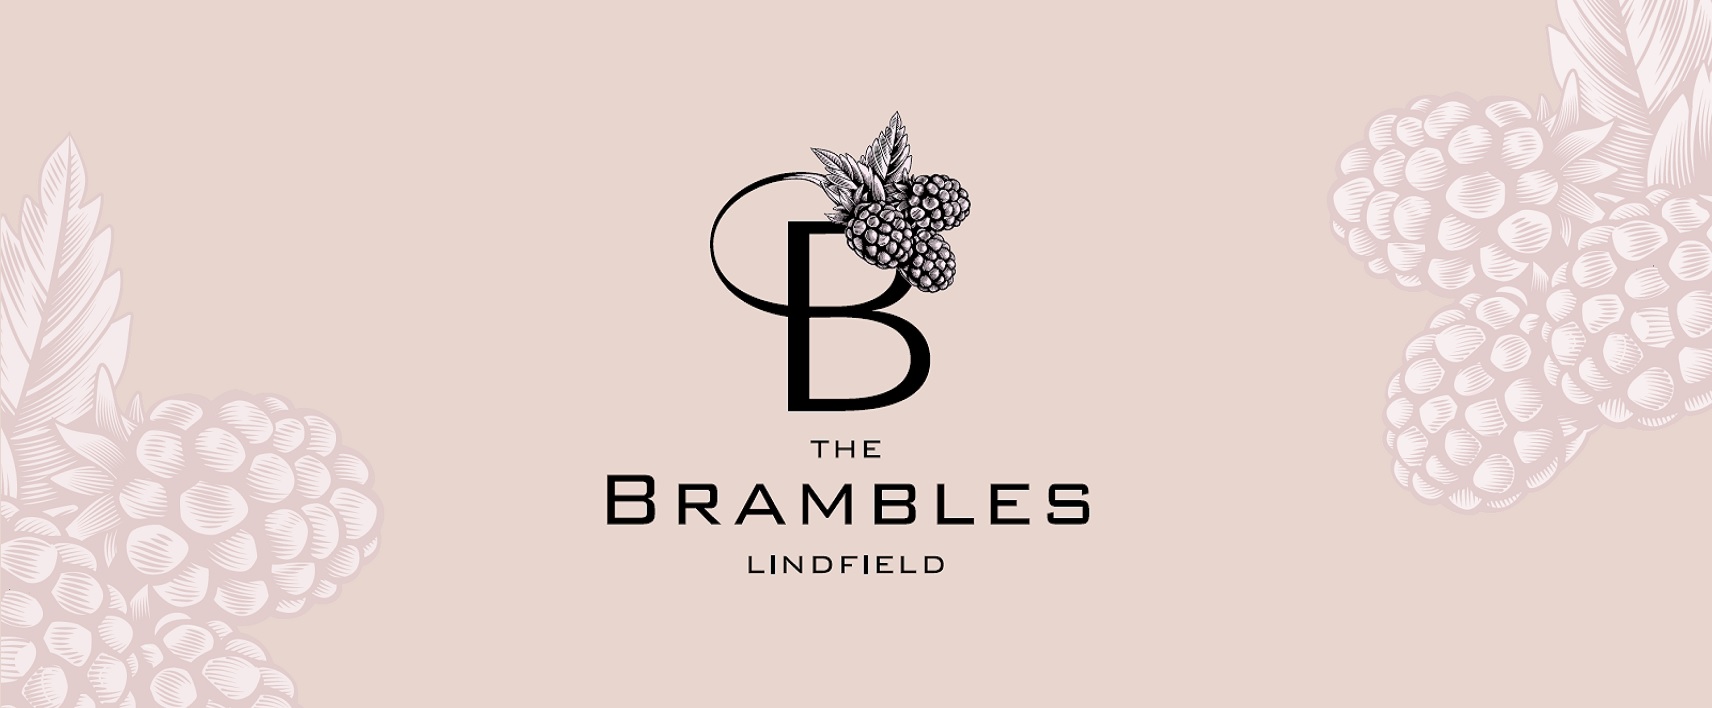 New Homes in Lindfield - The Brambles